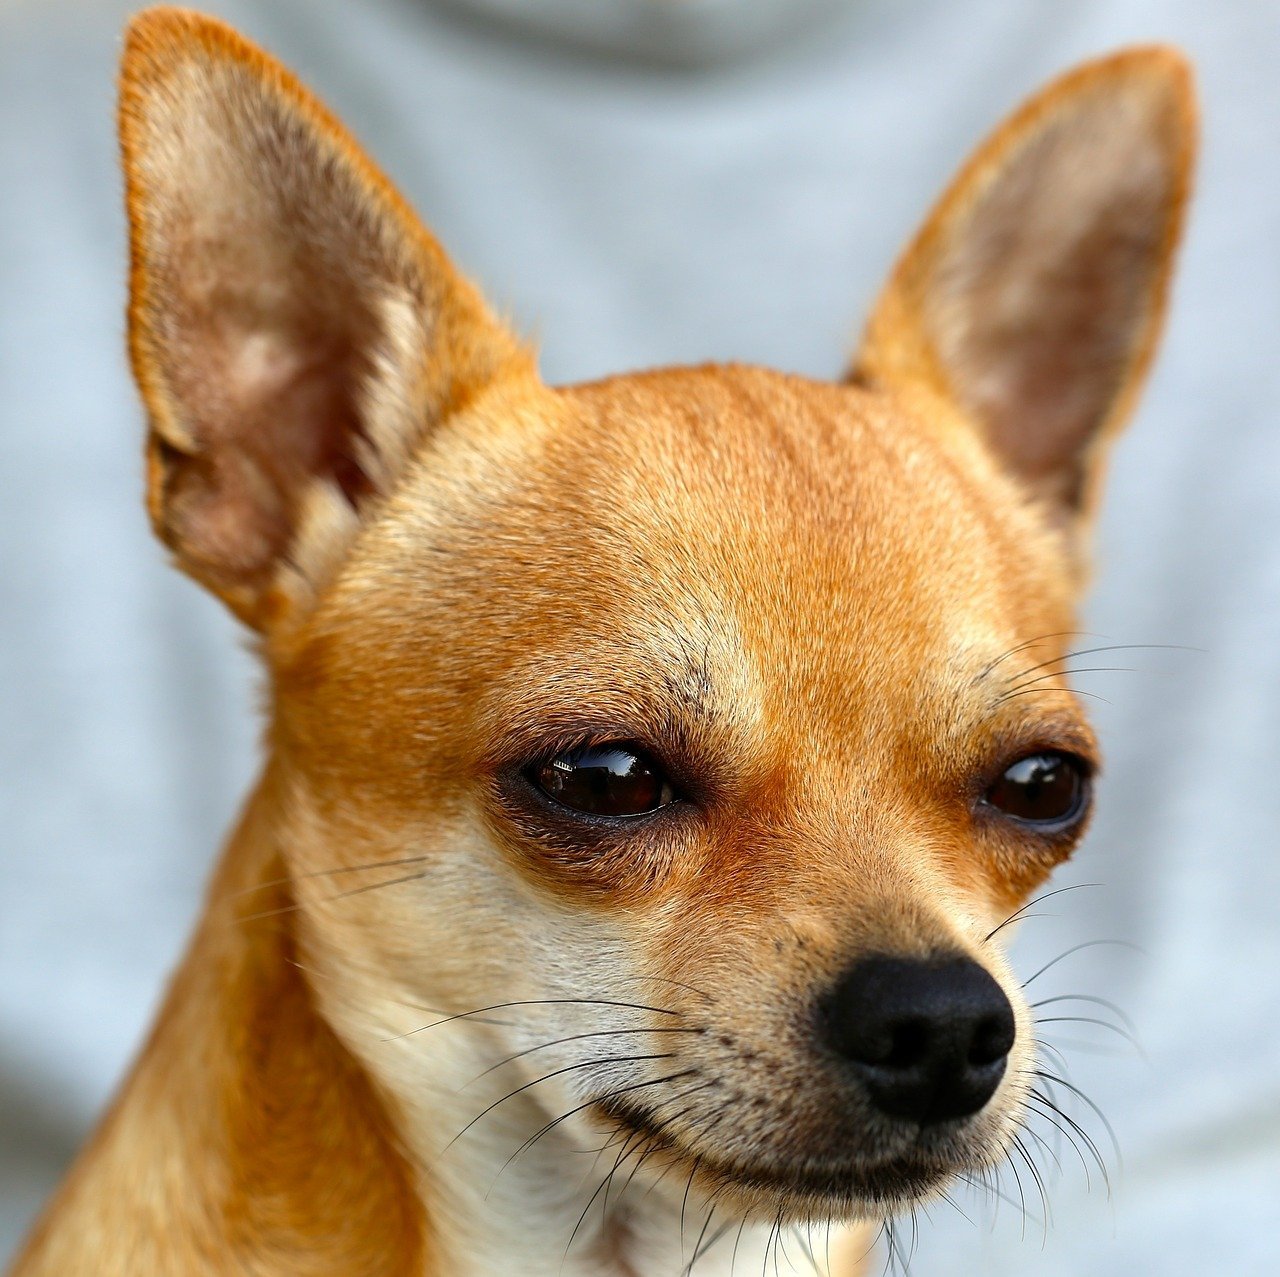 A close-up of a Chihuahua with its ears standing and a suspicious look on its face | Photo: Pixabay/a-mblomma